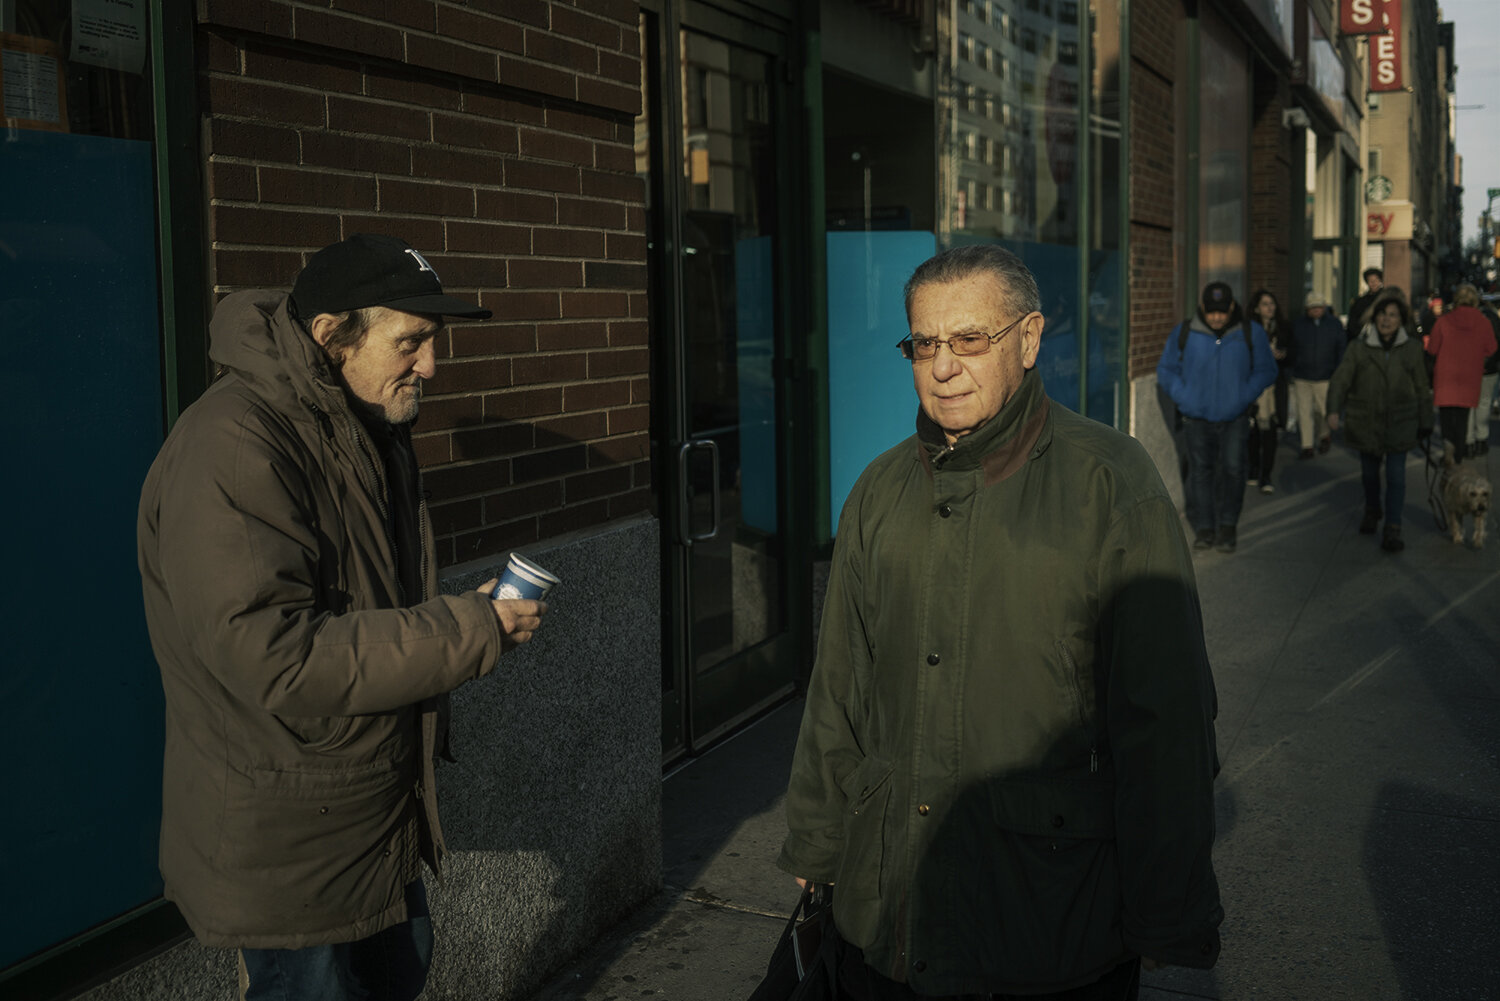 NYC_Street_2018_Old_Man_Begging_and_Friend-006.jpg